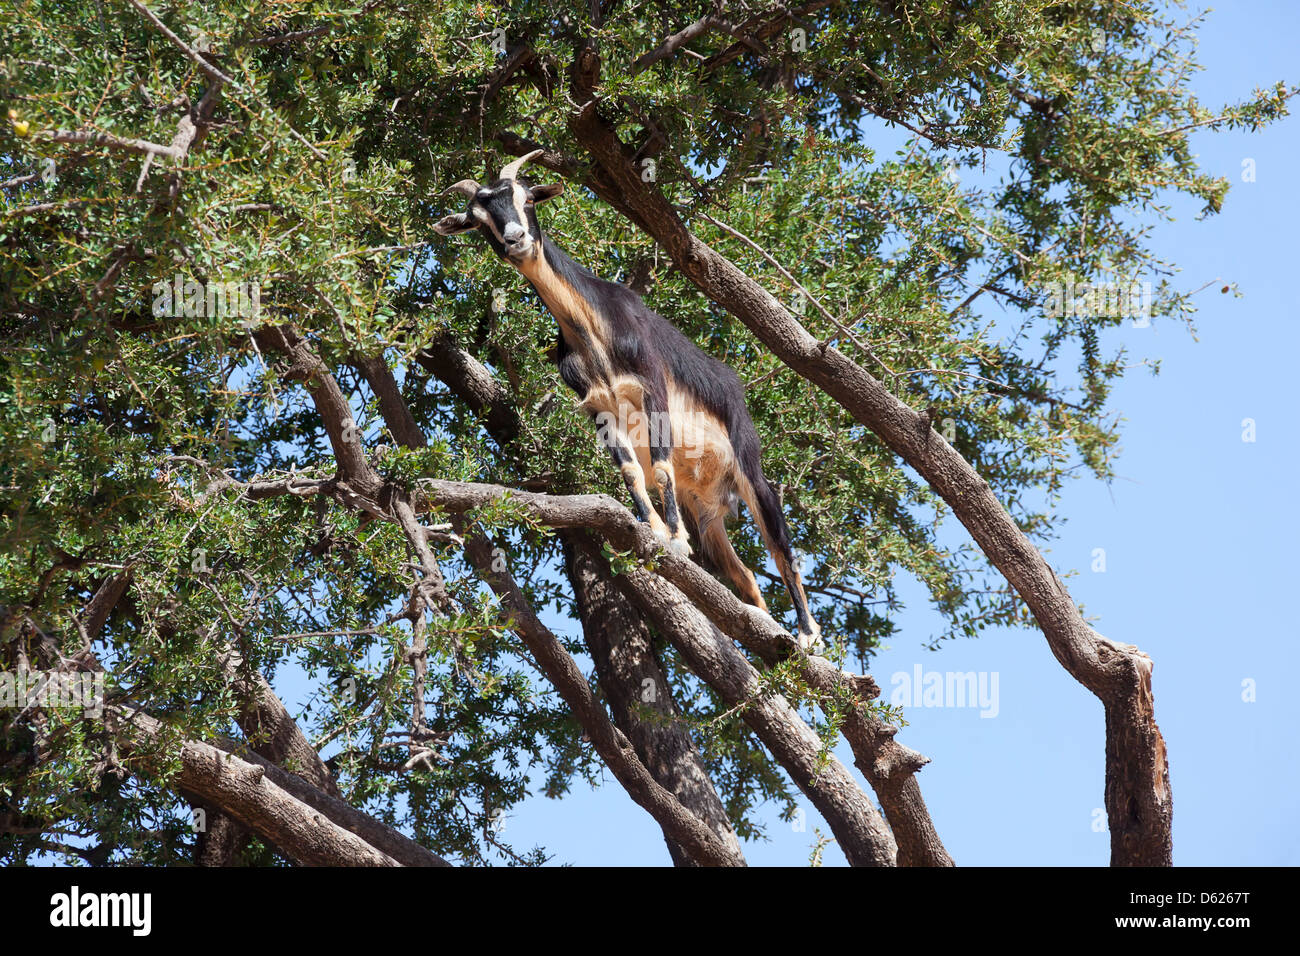 A goat on a branch of a Argan tree (argania spinosa) Stock Photo